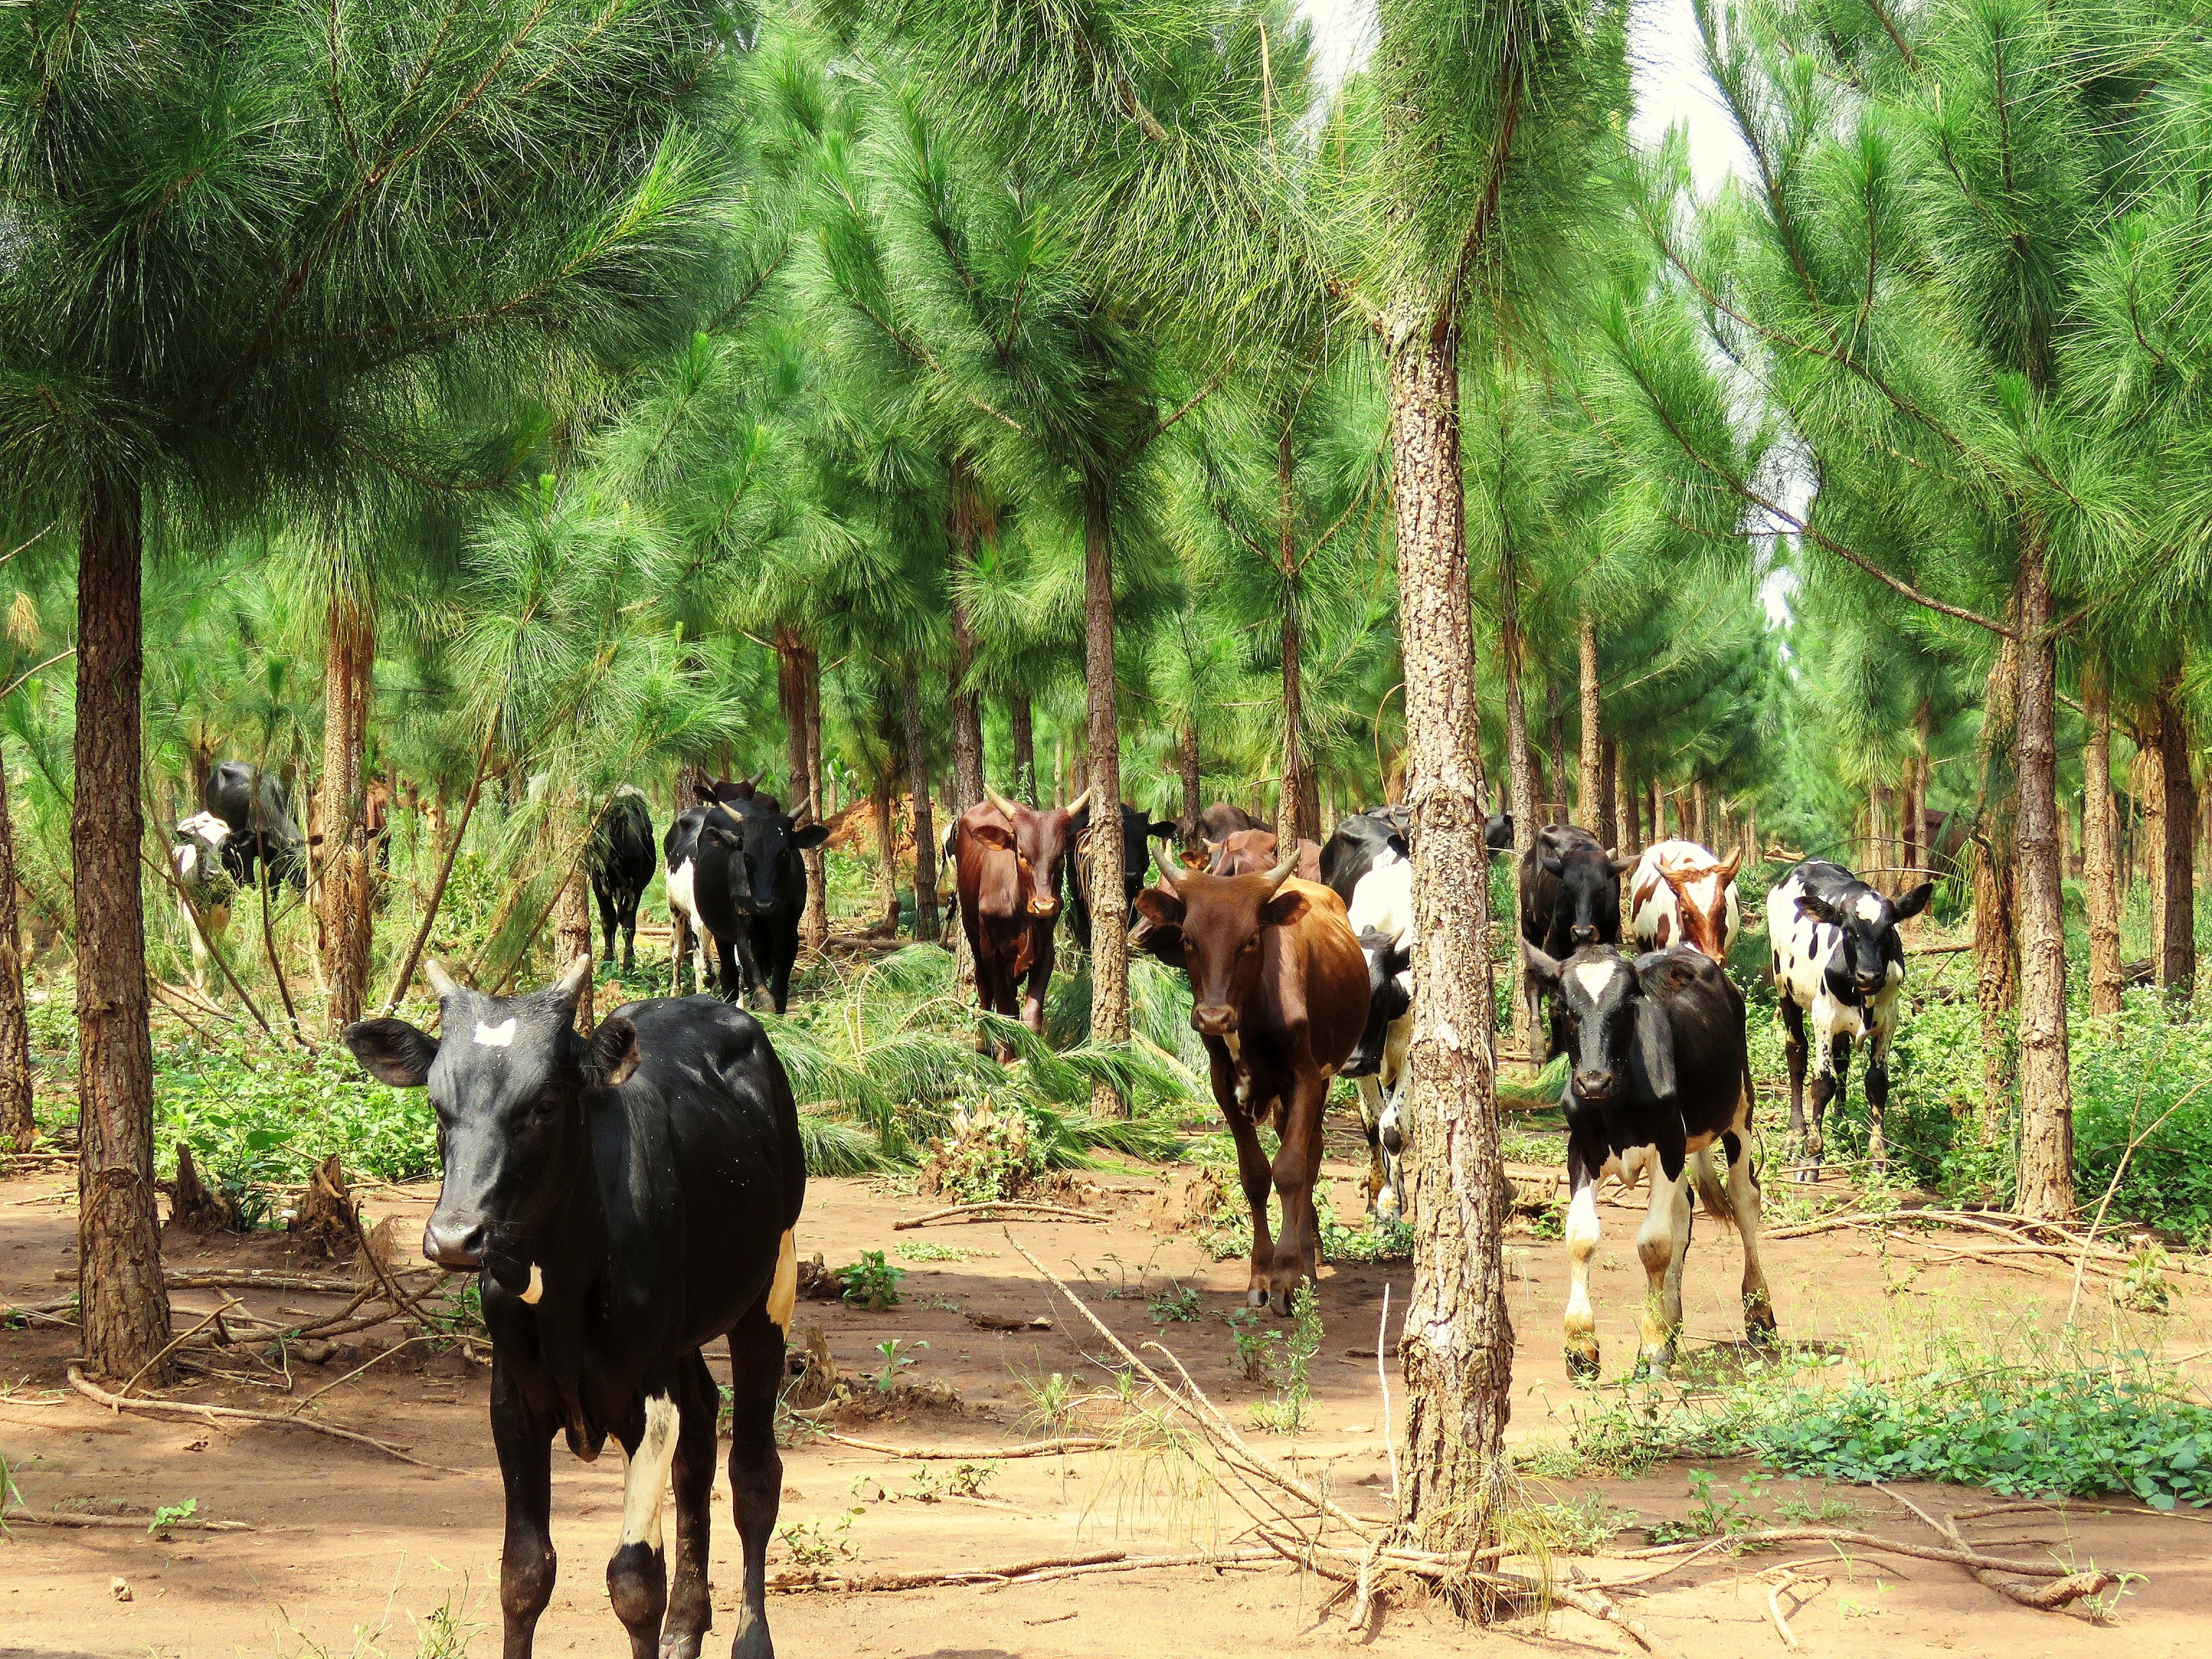 Cattle in the forest